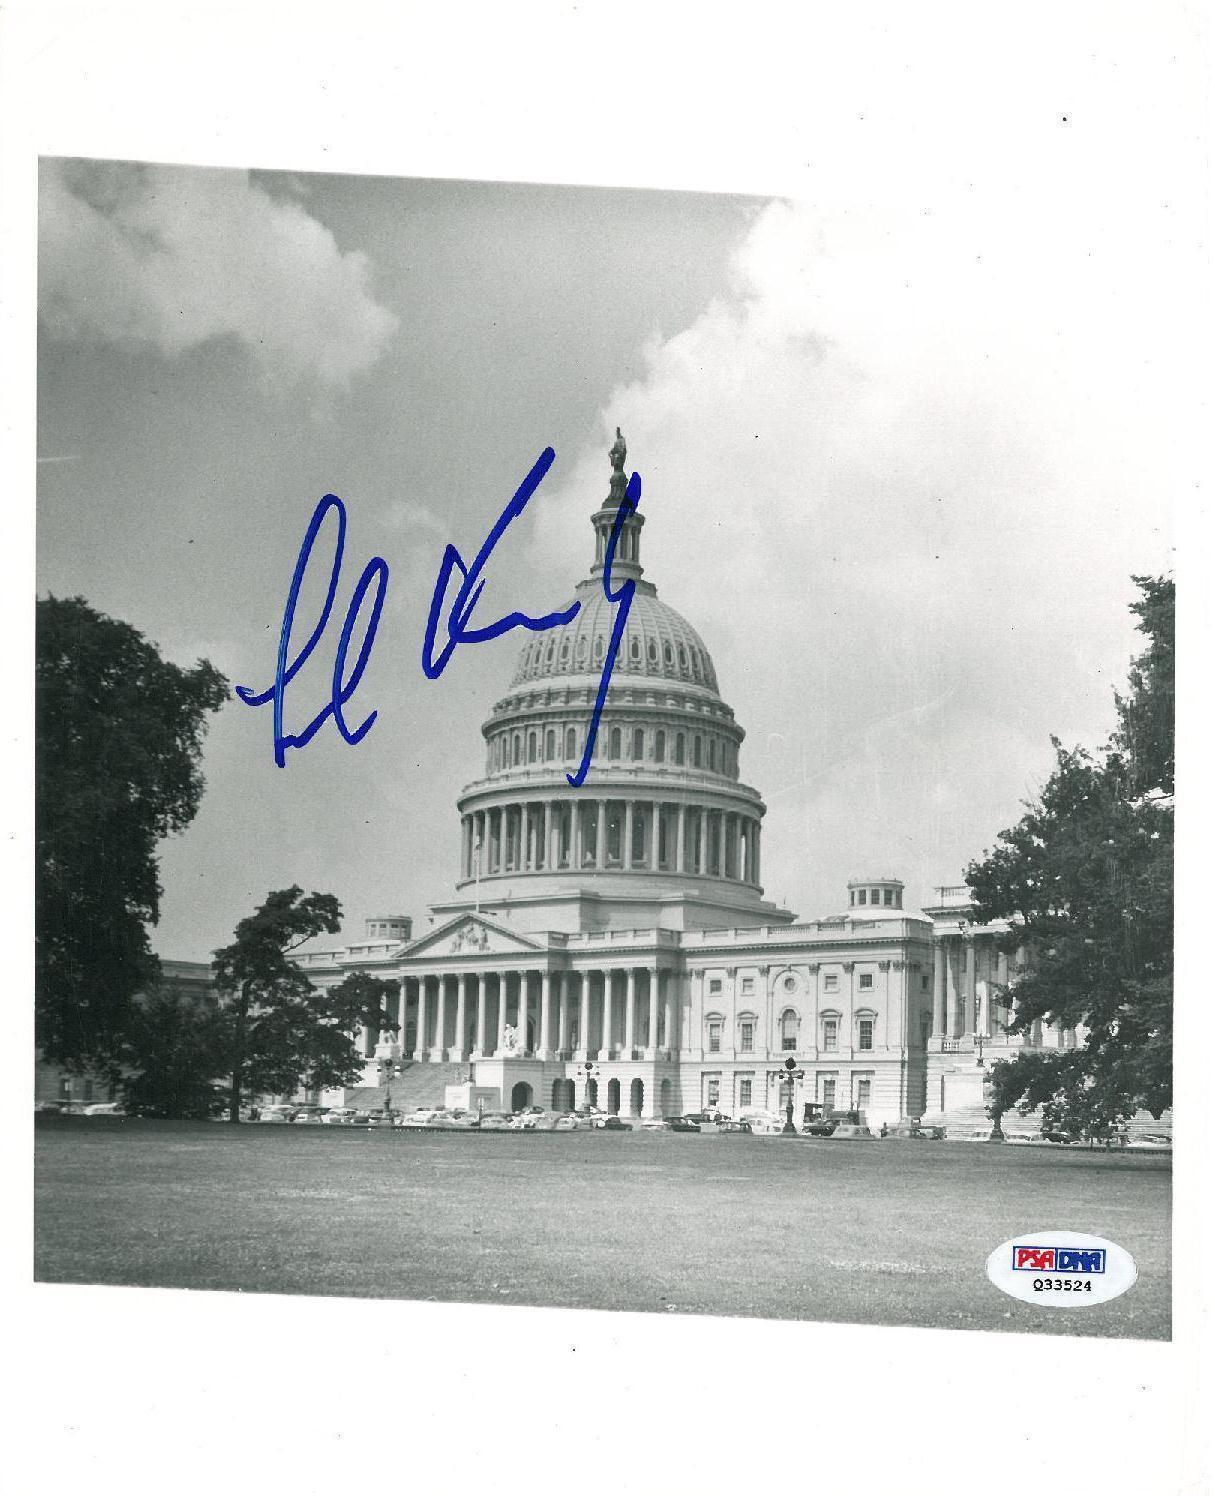 Ted Kennedy Signed US Capitol Building Authentic 8x10 Photo Poster painting (PSA/DNA) #Q33524